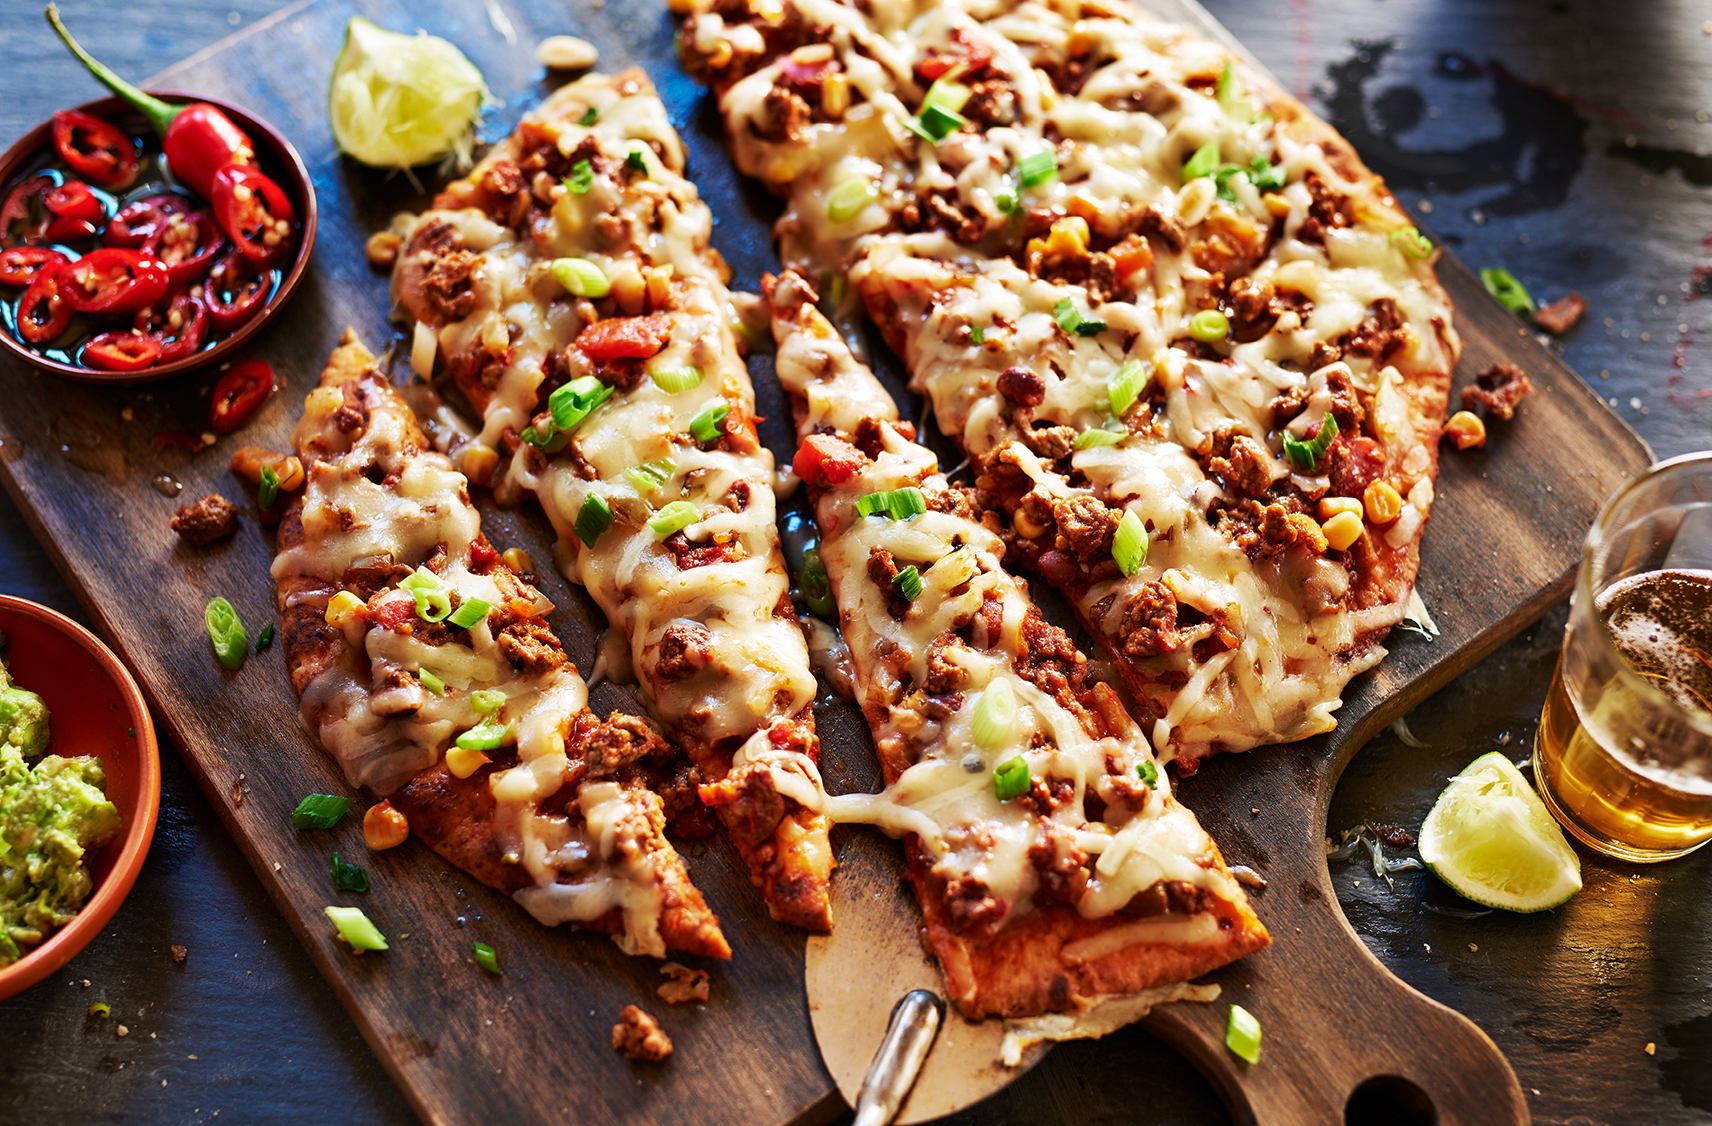 A sliced Mexicasa pizza with cheese, green onions, peppers & ground meat